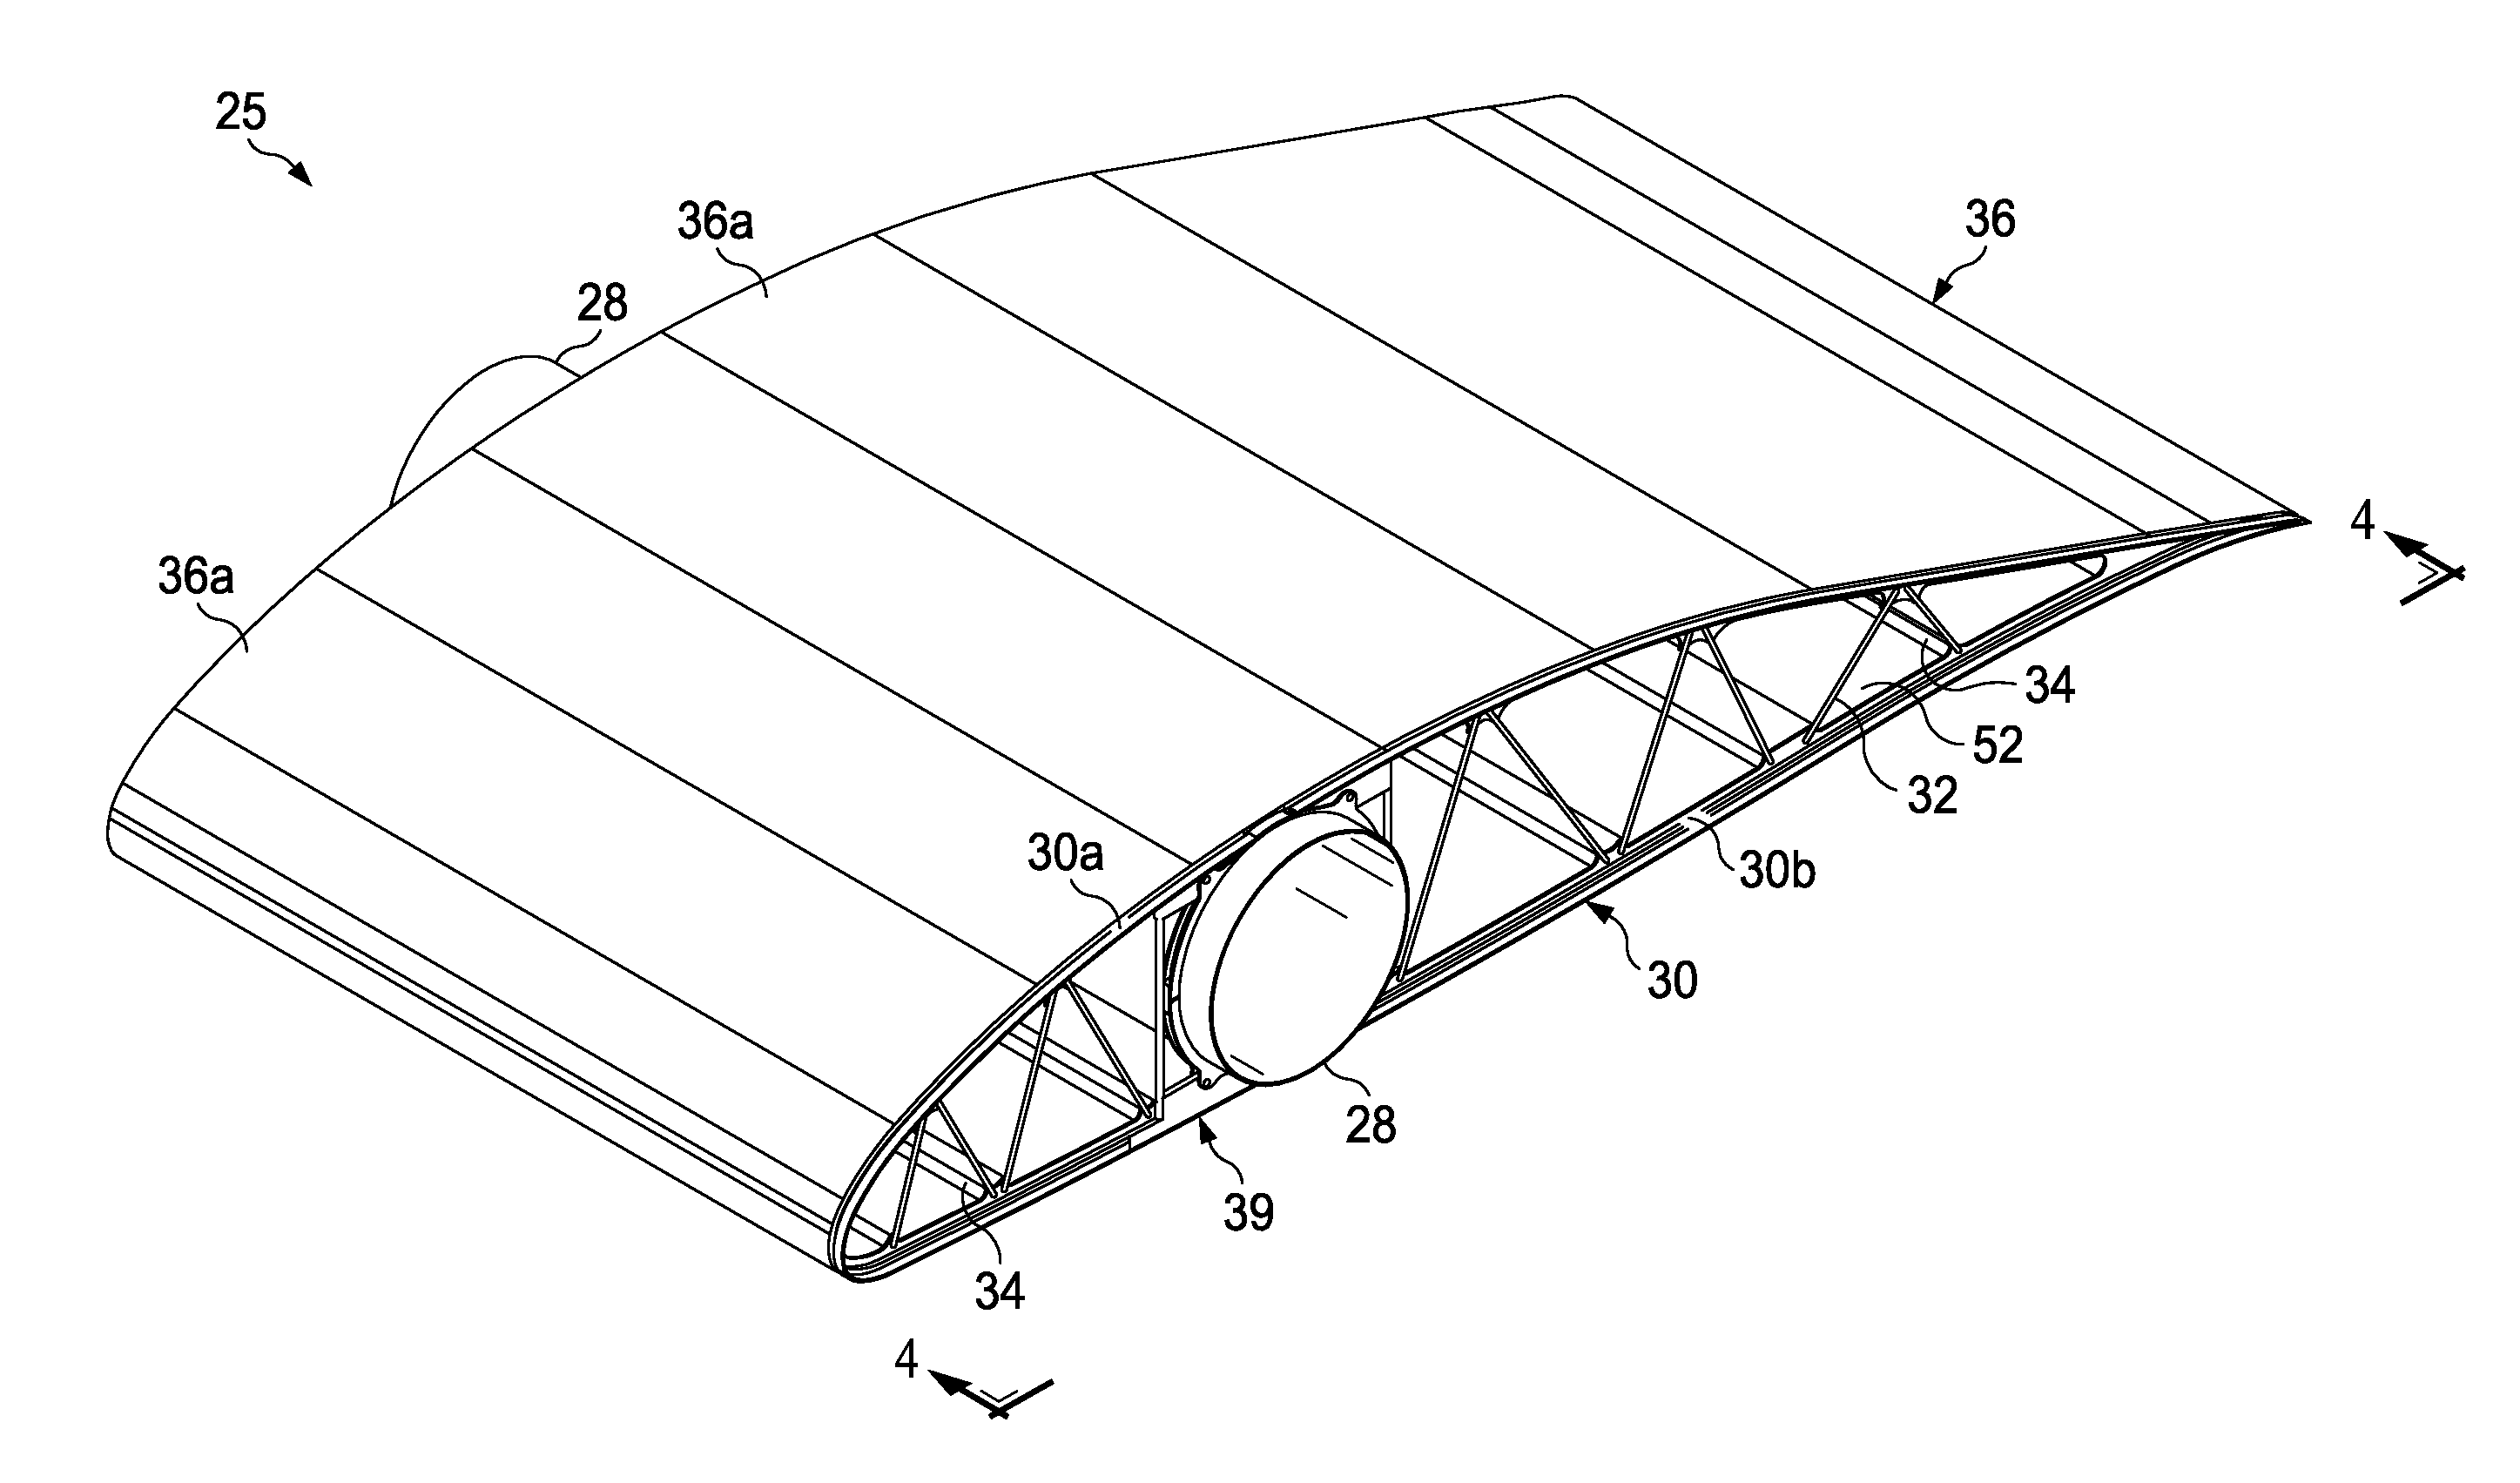 Attachment of Aircraft Ribs to Spars Having Variable Geometry